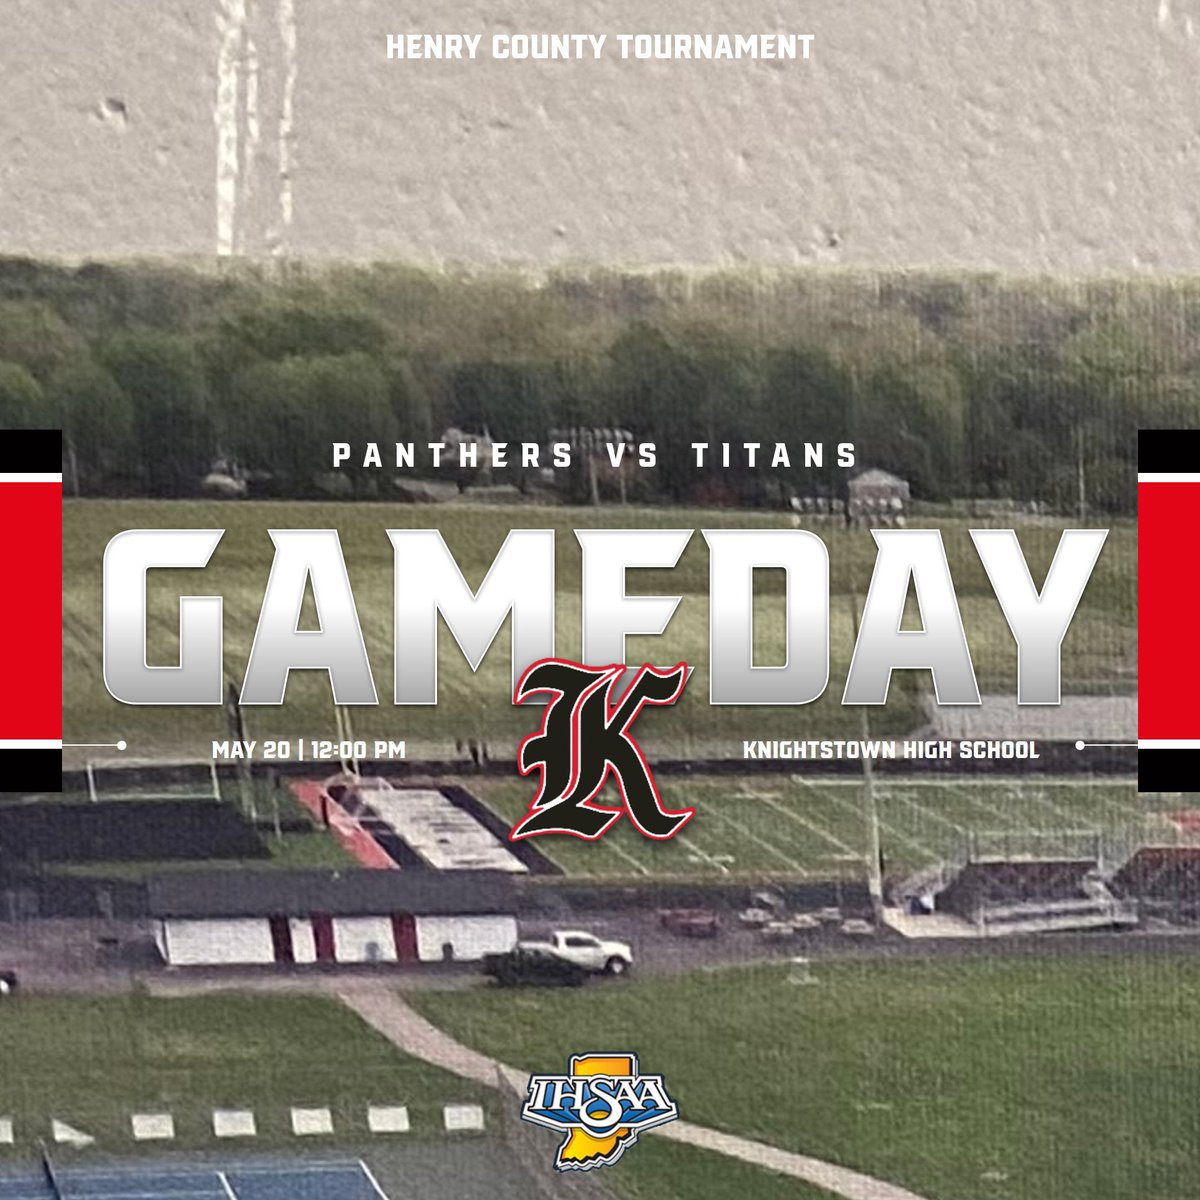 🚨🚨SCHEDULE UPDATE👀🚨🚨

PANTHER BASEBALL GAMEDAY! 
HENRY COUNTY TOURNAMENT 
@trititanAD 
🕚12:00  PM
Forecast: ☀️61°
Win For Mikey and Each Other🖤❤️

#WeAreKtownBSBL ⚾️
#PantherPride🐾 #Expect2Win #AcceptTheChallenge 🇺🇸🦅